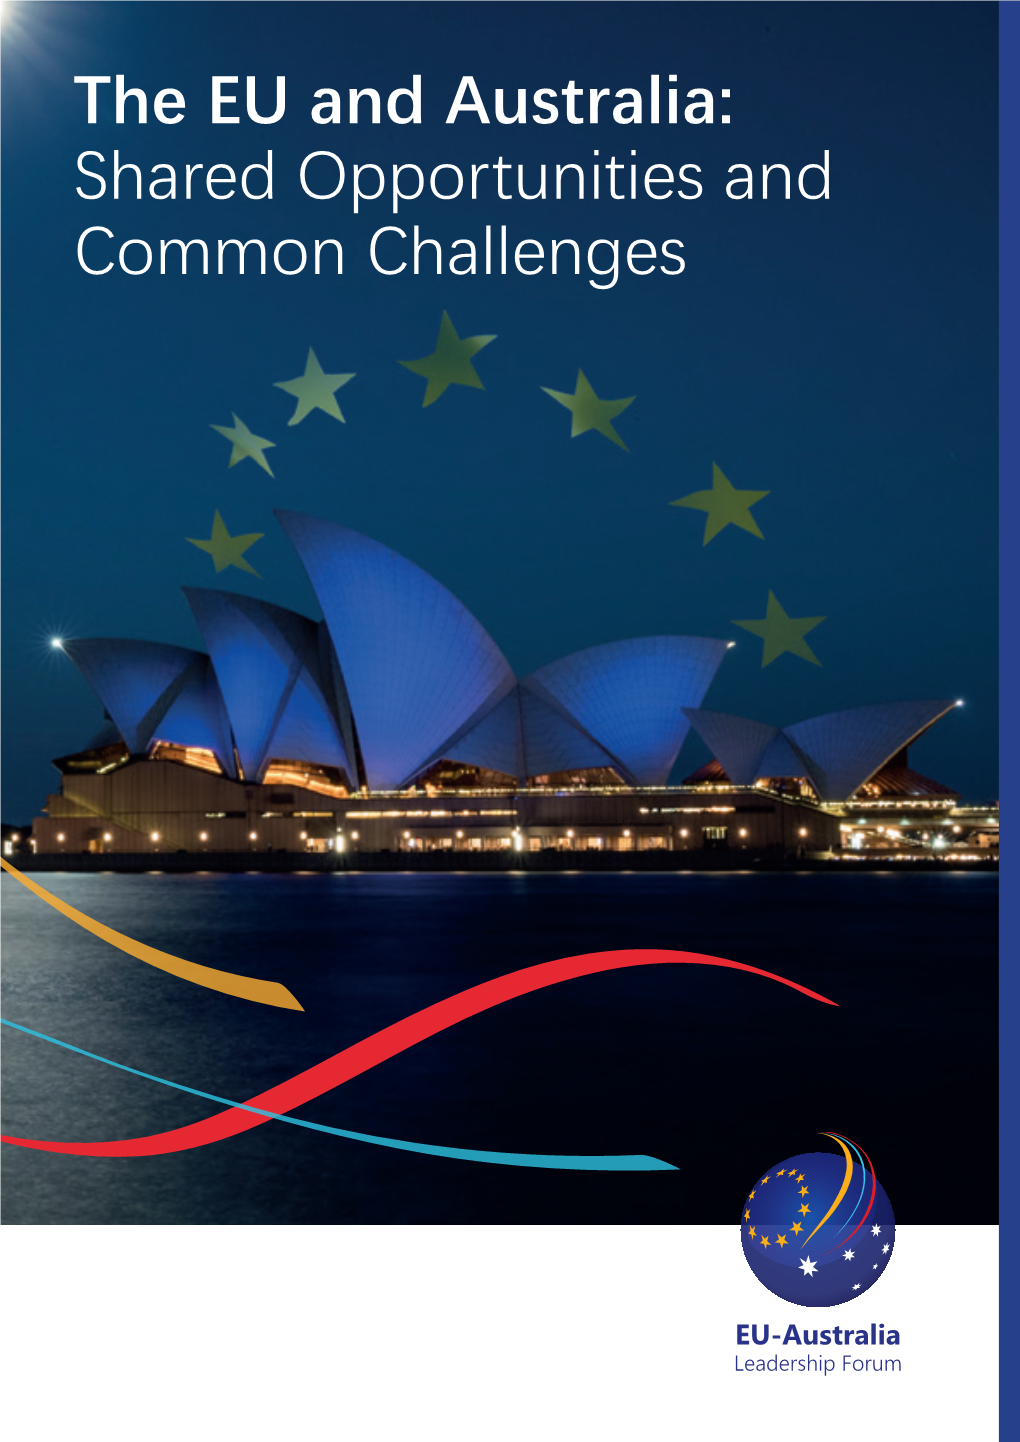 The EU and Australia: Shared Opportunities and Common Challenges Introduction